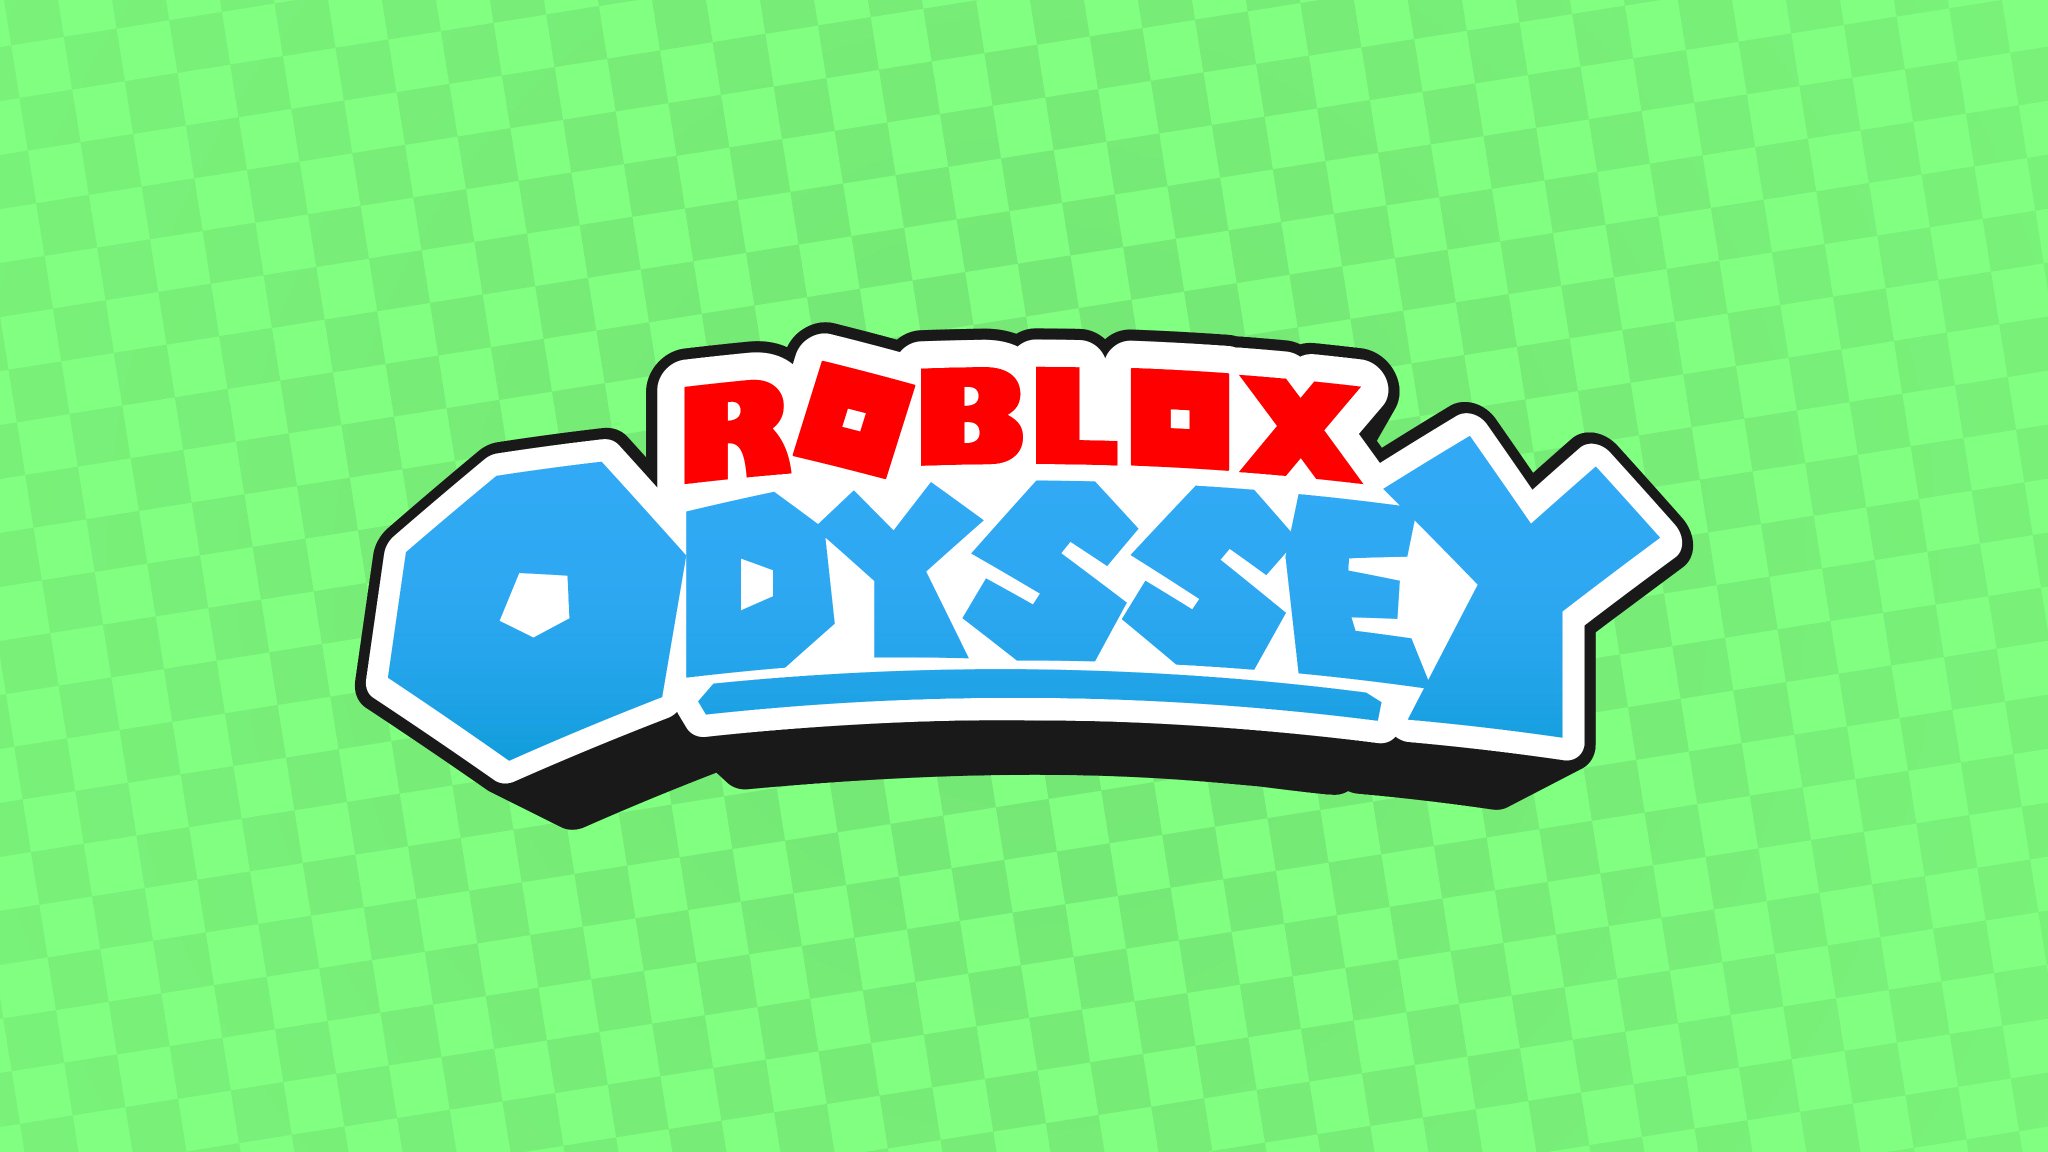 Roblox Odyssey On Twitter The Game S Thumbnail And Logo Have Both Been Remade By Ziggzaggrbx Robloxdev Robloxgfx Robloxodyssey - roblox 2 logo robloxlogo2477 twitter